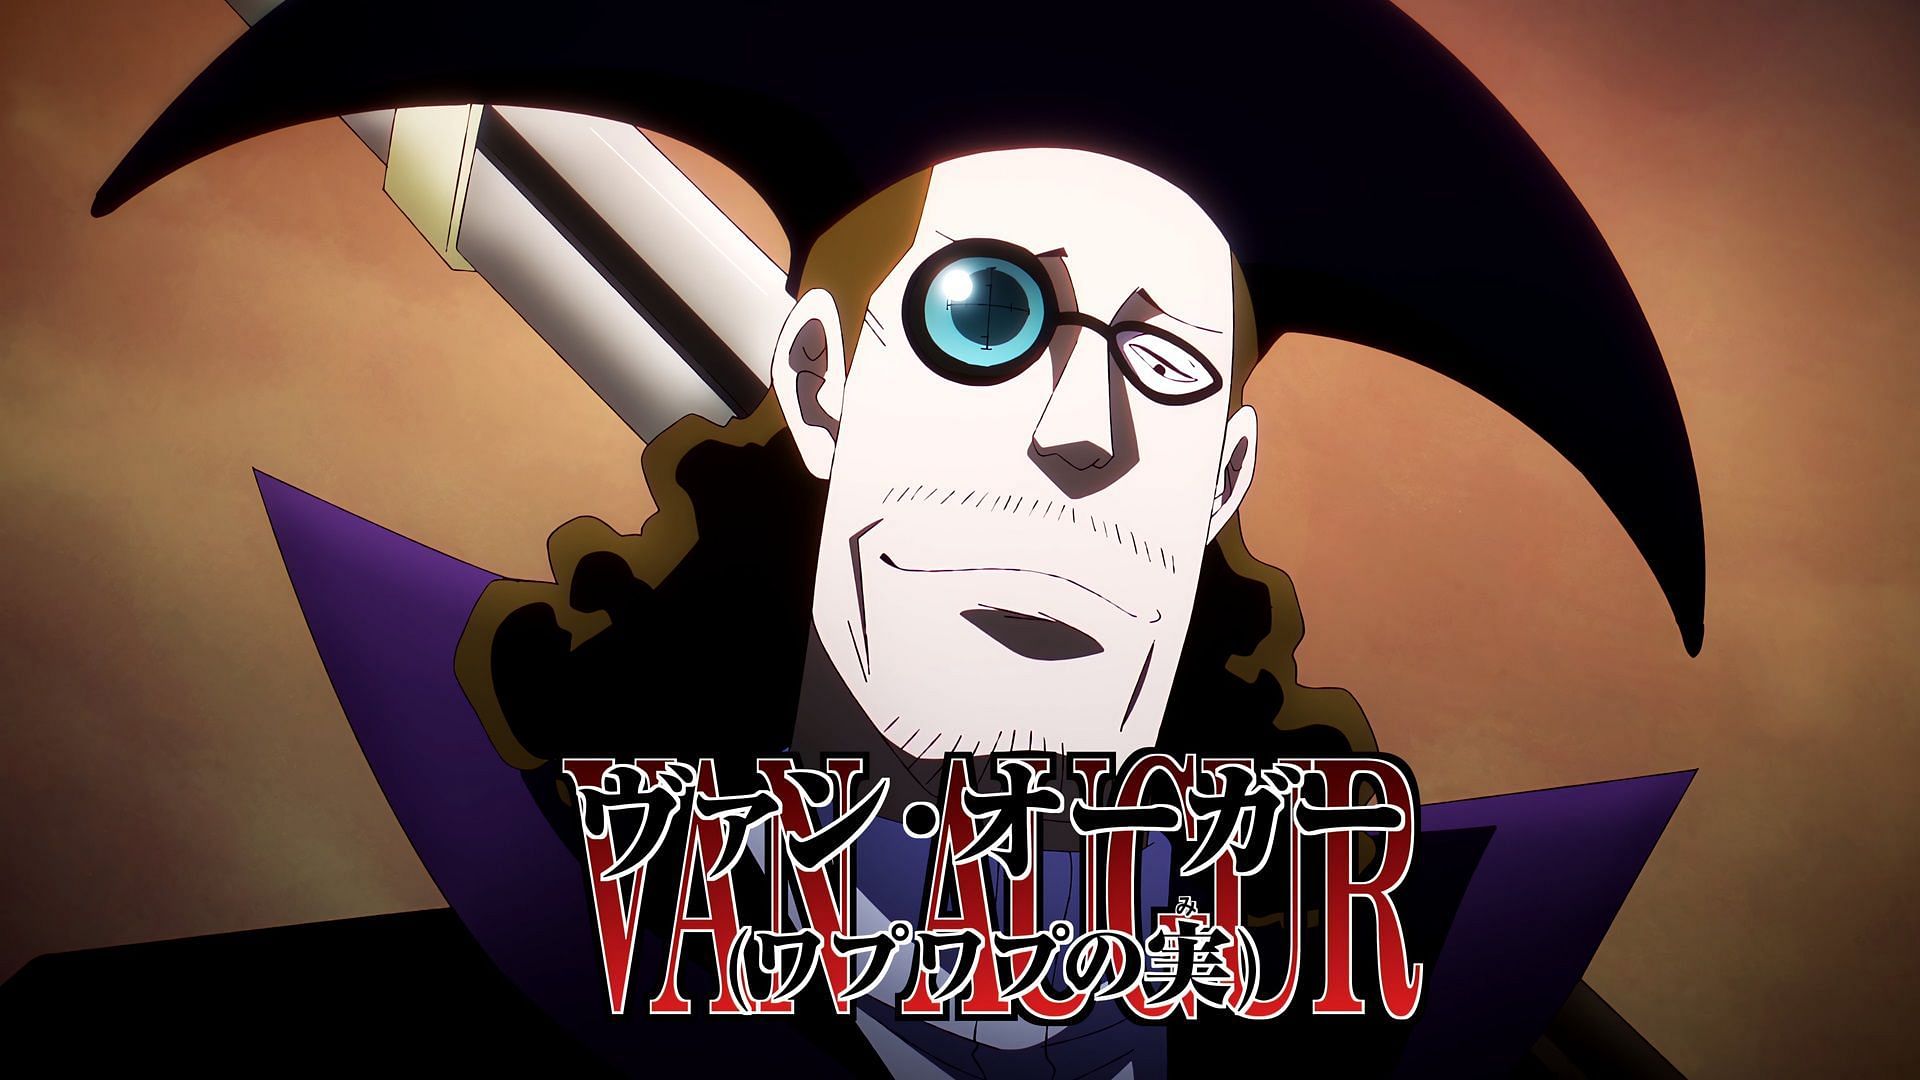 Van Augur as seen in the One Piece anime (Image via Toei Animation)